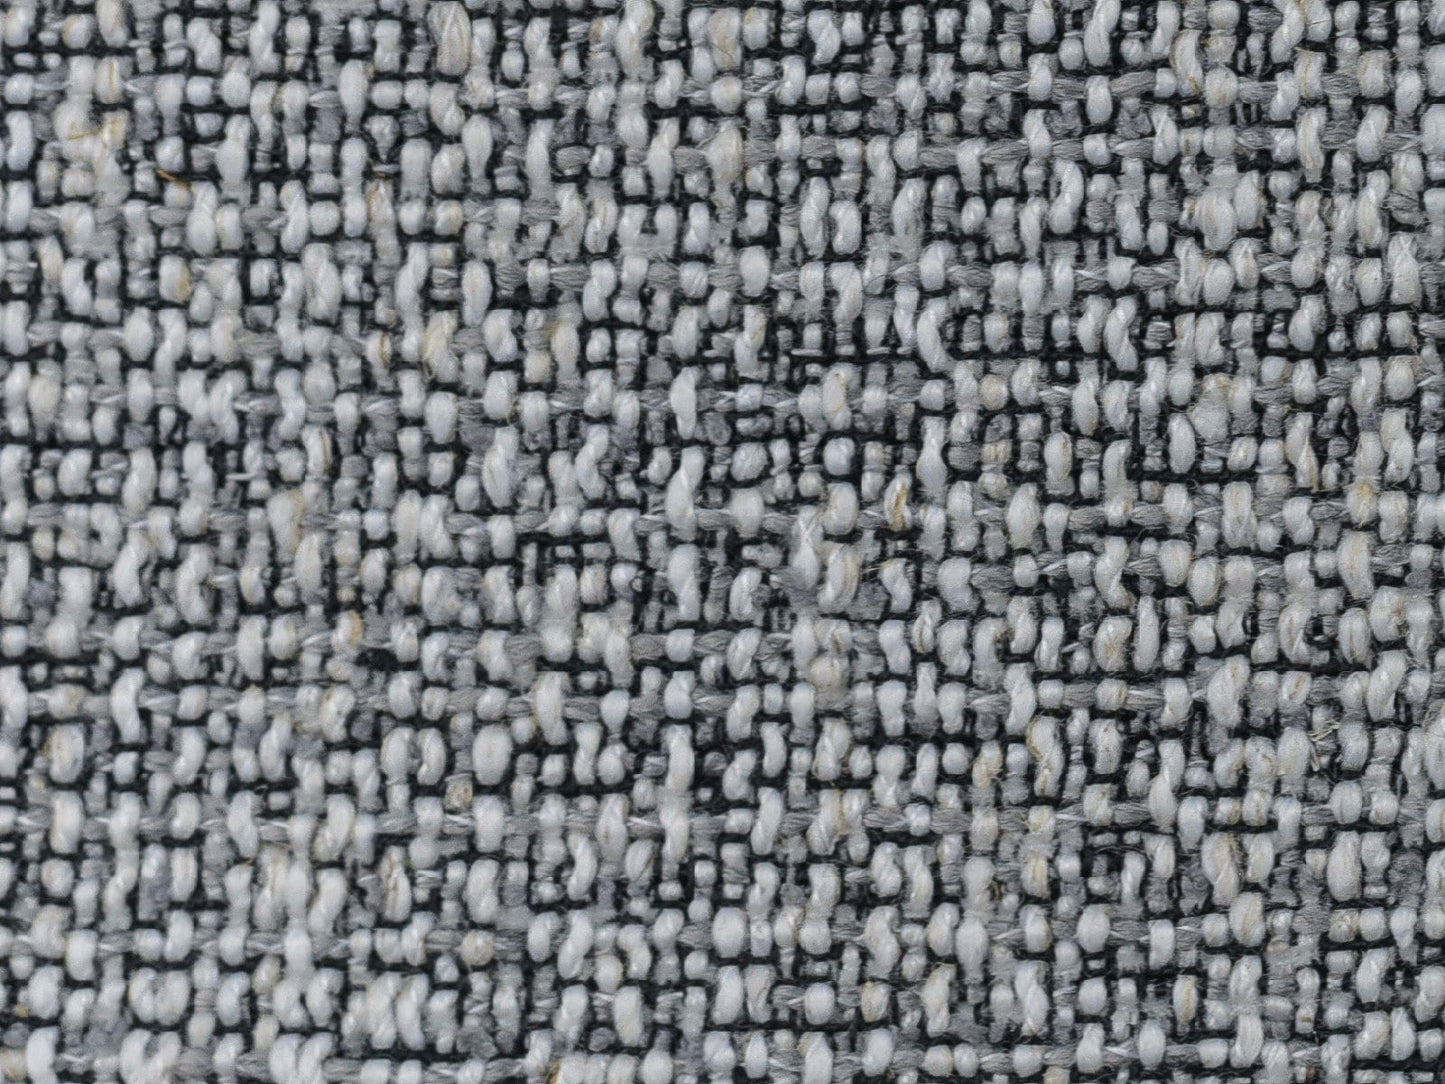 Contemporary Coarse Woven Textured Upholstery Fabric By The Yard 57"W/600GSM-Capability Grifin